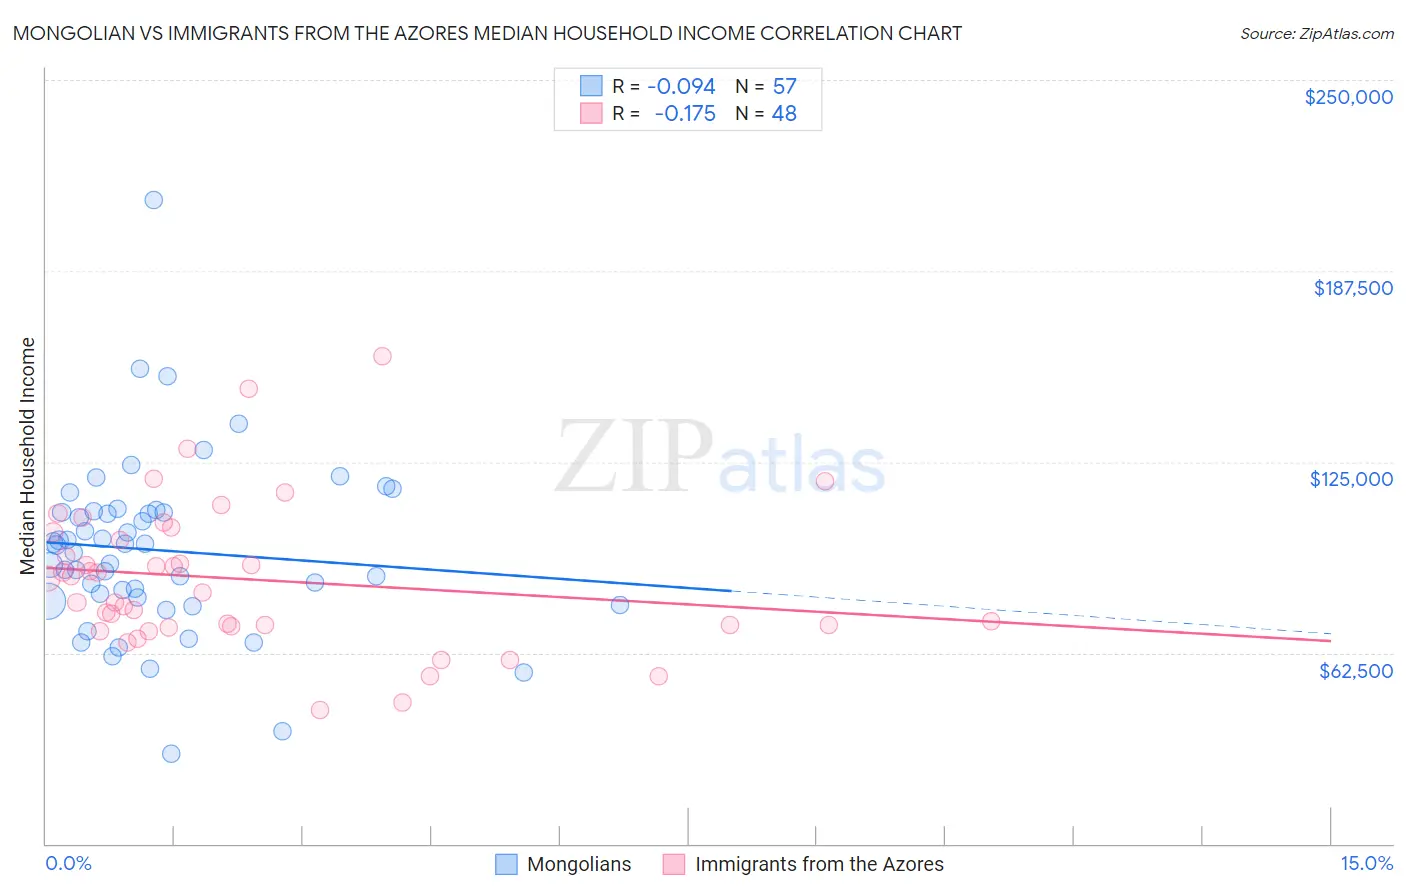 Mongolian vs Immigrants from the Azores Median Household Income